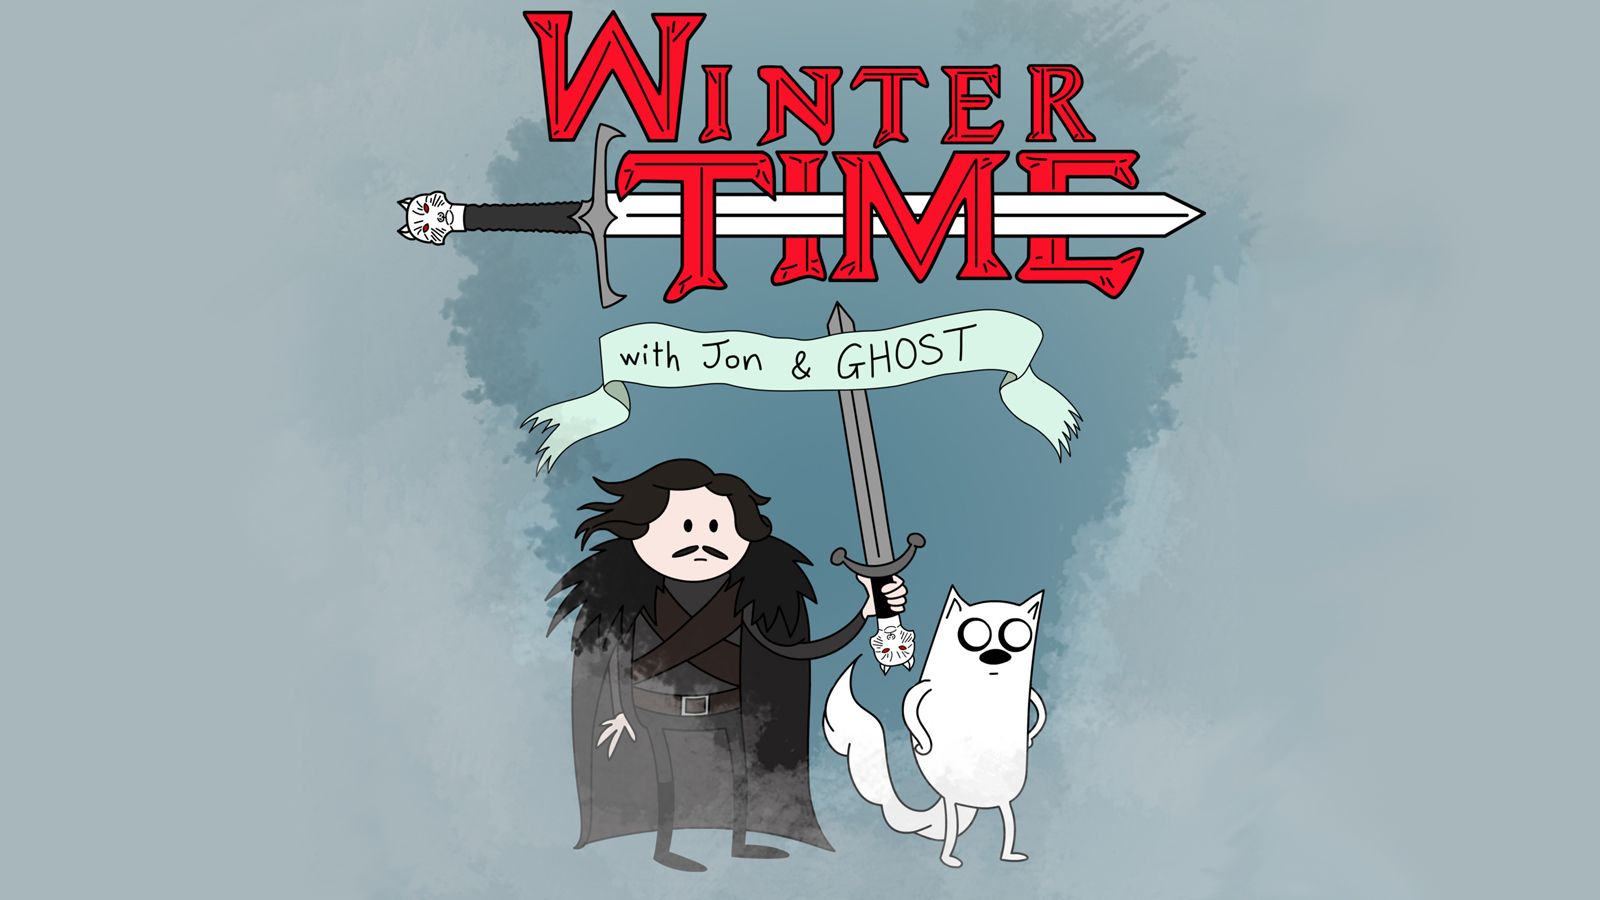 wallpapers humor, movie, a song of ice and fire, adventure time, game of thrones, ghost, jon snow